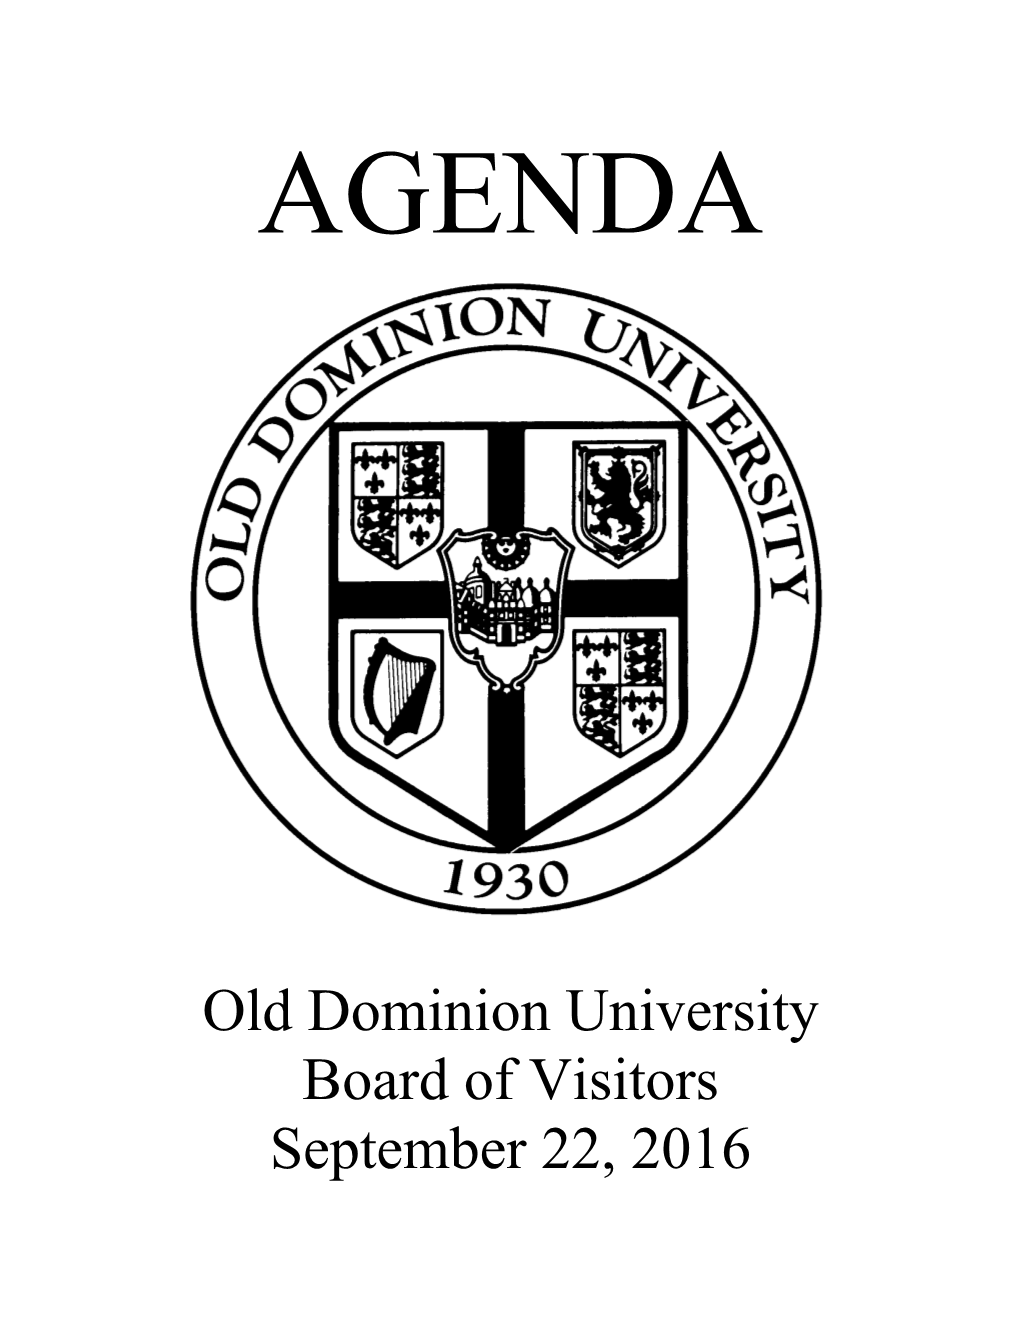 Old Dominion University Board of Visitors September 22, 2016 BOARD of VISITORS OLD DOMINION UNIVERSITY Thursday, September 22, 2016, 8:45 A.M